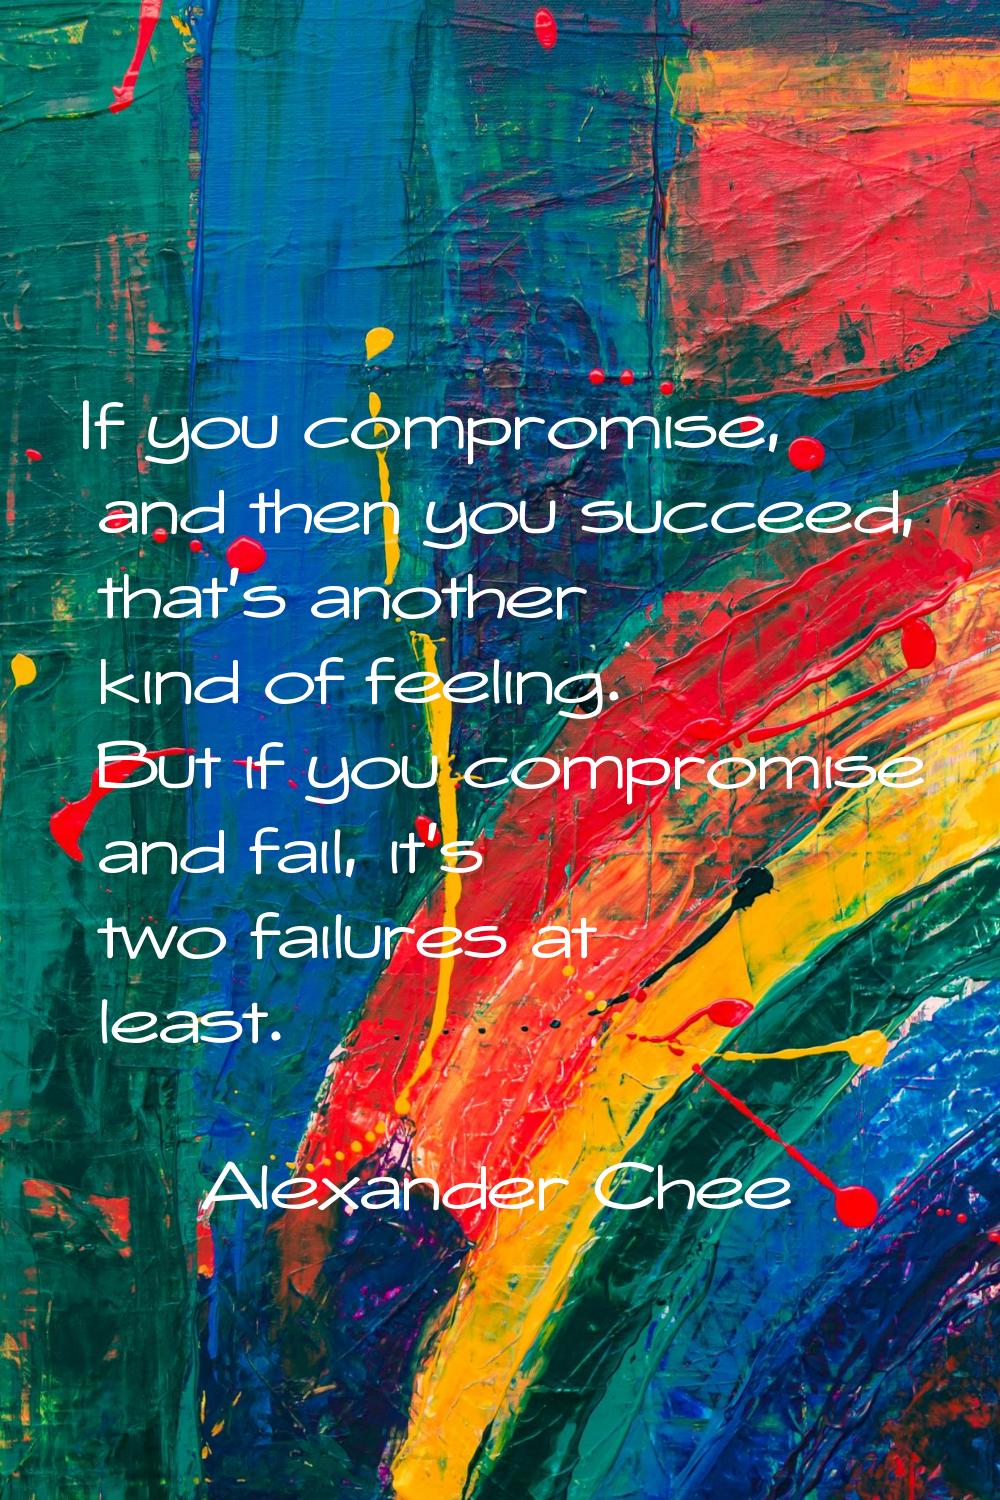 If you compromise, and then you succeed, that's another kind of feeling. But if you compromise and 